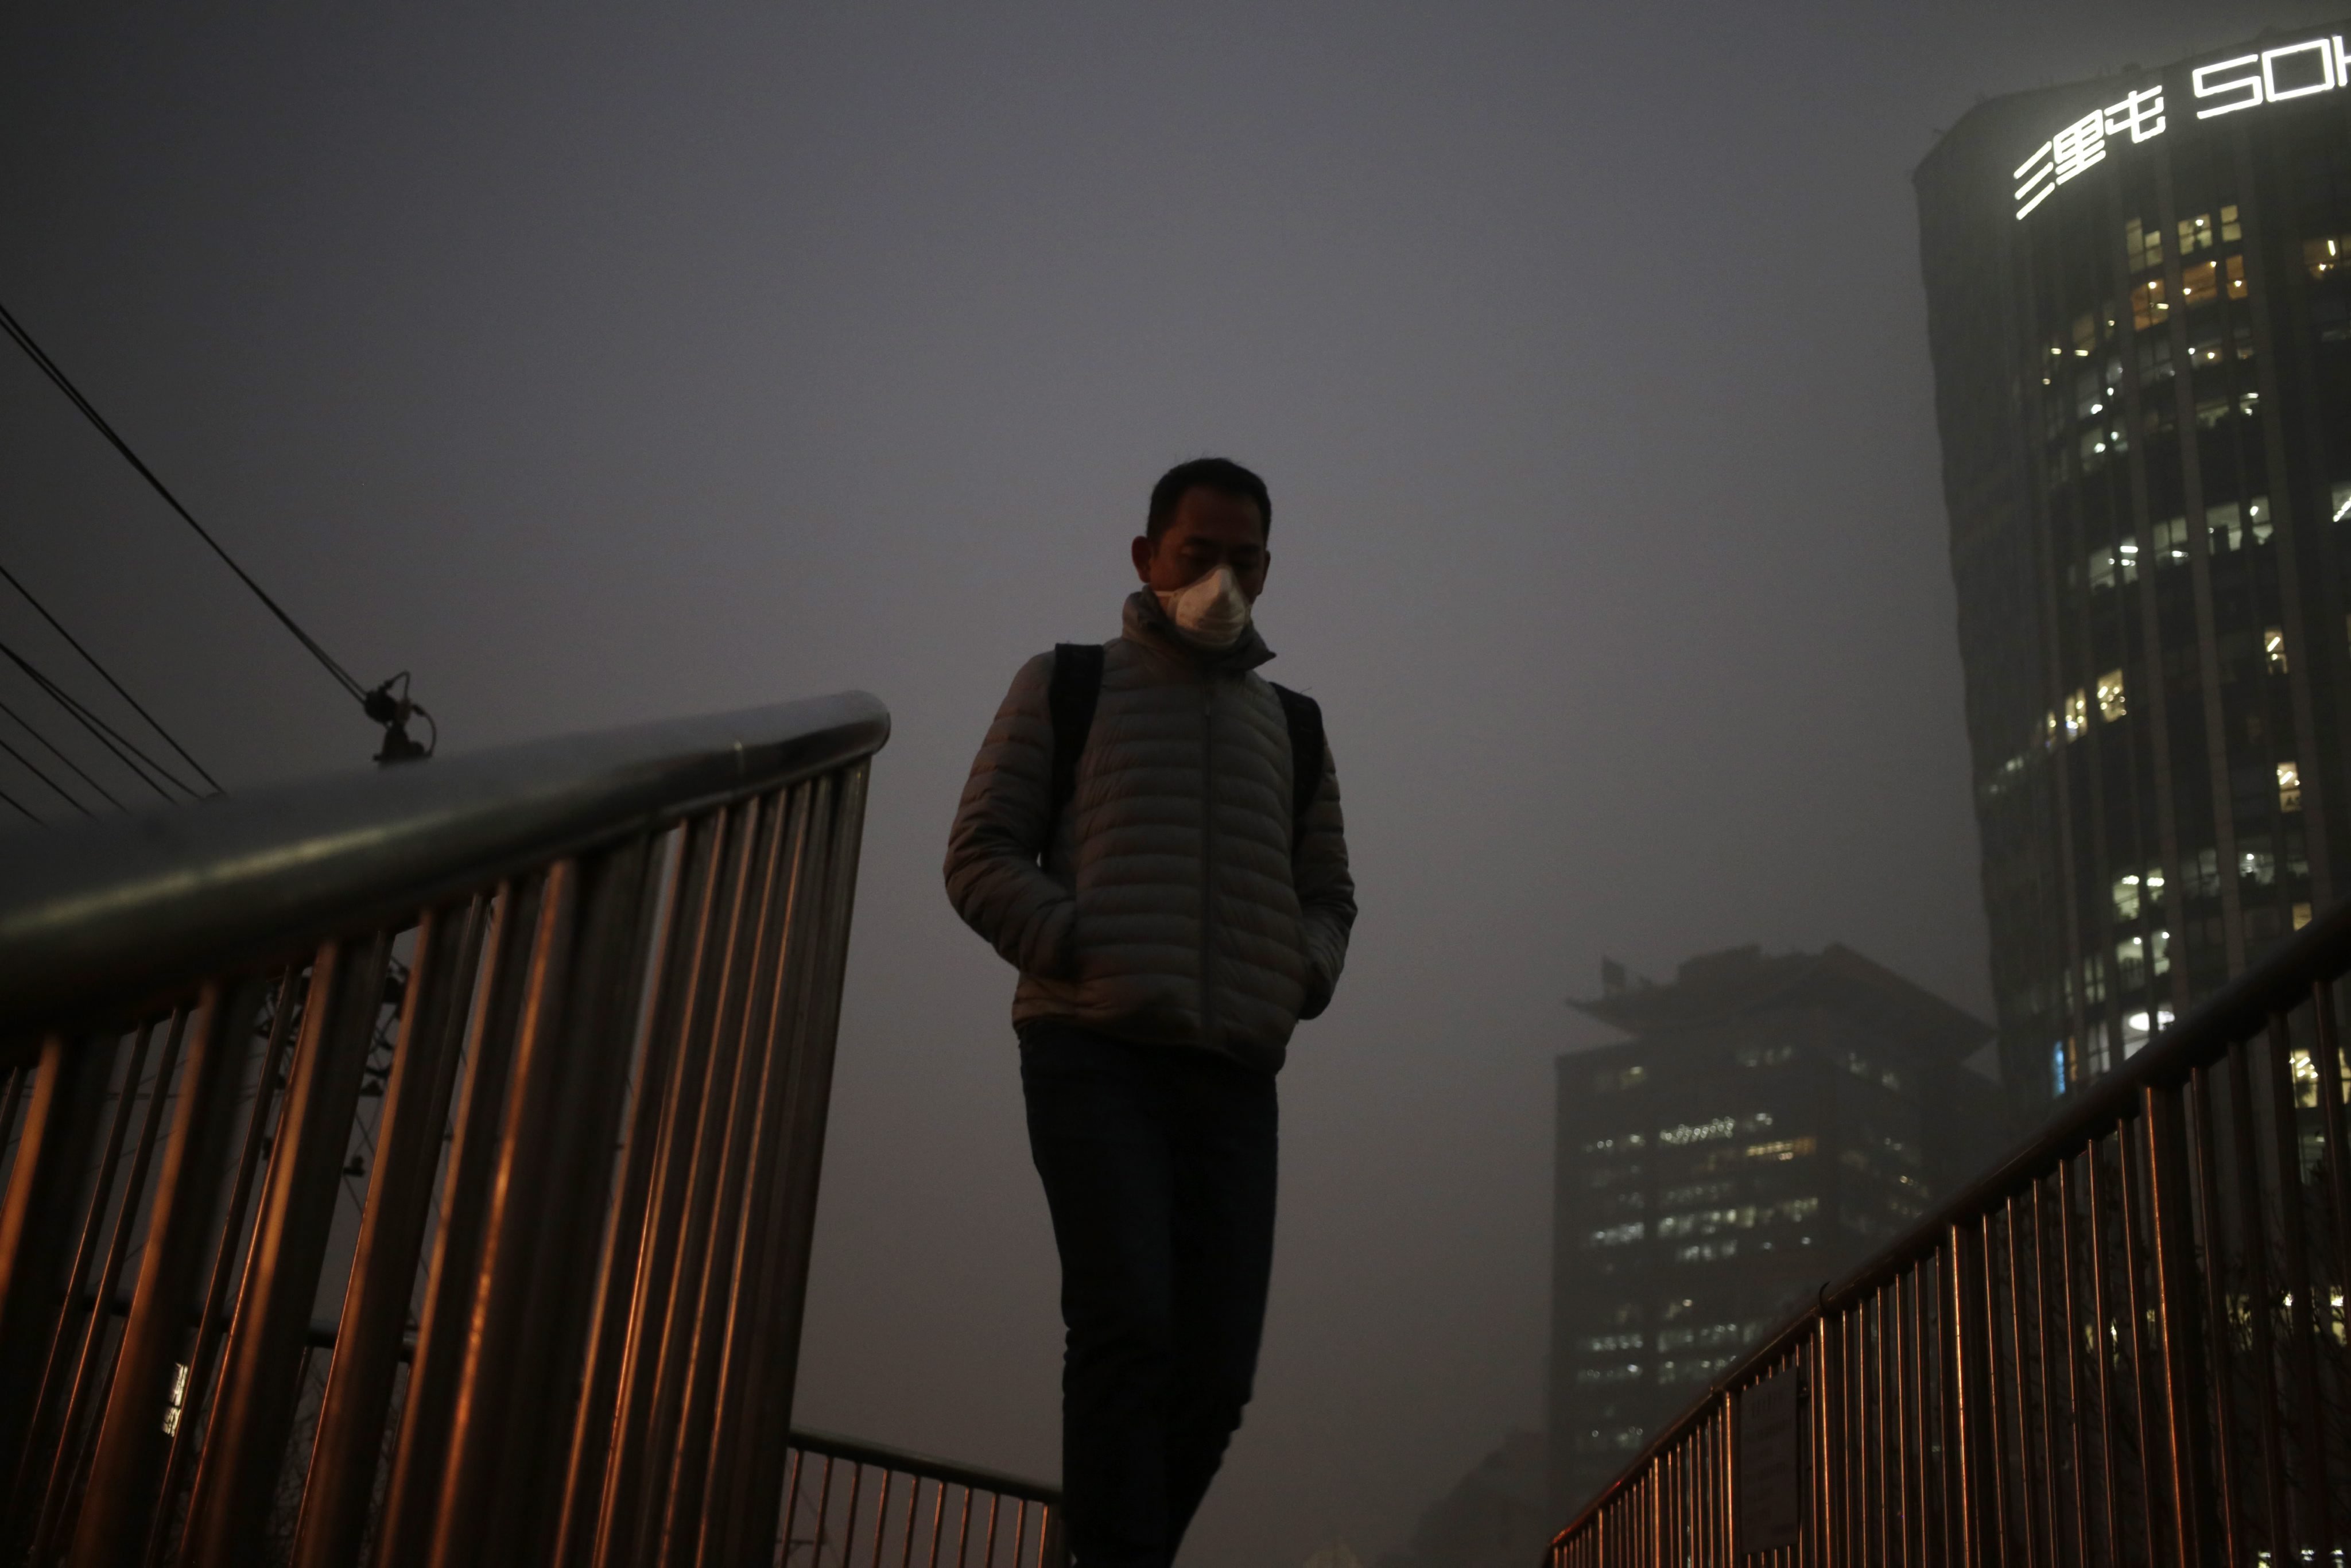 A man wears a mask as he walks on a bridge shrouded in smog in Beijing, Dec. 1, 2015. Beijing issued its second red alert for smog on Dec. 18, 2015, urging schools to close and residents to stay indoors for the second time in 10 days. (How Hwee Young—EPA)